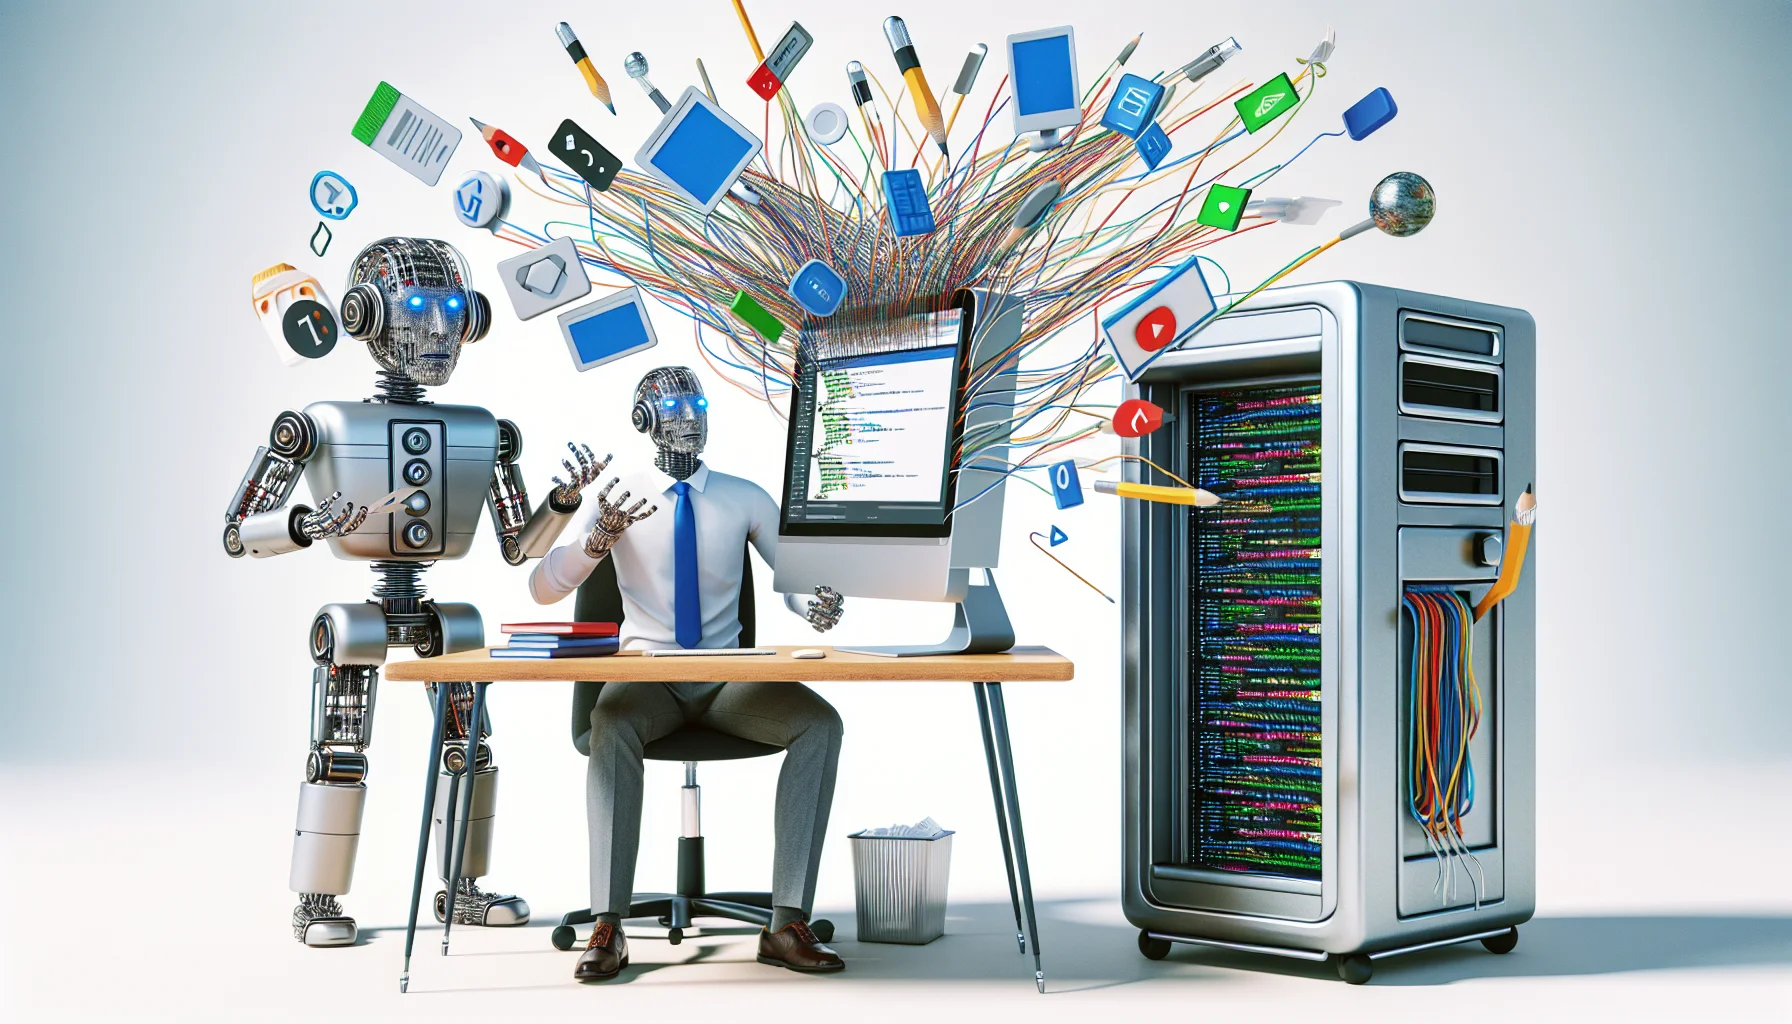 Imagine a humorous and engaging scene where an artificial intelligence website builder is at work. Picture an anthropomorphized AI with metal arms, wires as hair, and a screen showing lines of code as its face. It's sitting at a desk with a computer, surrounded by floating features of web design like buttons, banners, forms, and images. It appears to be juggling them deftly. Nearby, another AI dressed as a web server, portrayed as a gigantic metal locker with wires in different colors connecting to all directions, watches with amazement. The humorous element comes from the speed and efficiency of the AI website builder, making it seem like a magic trick.